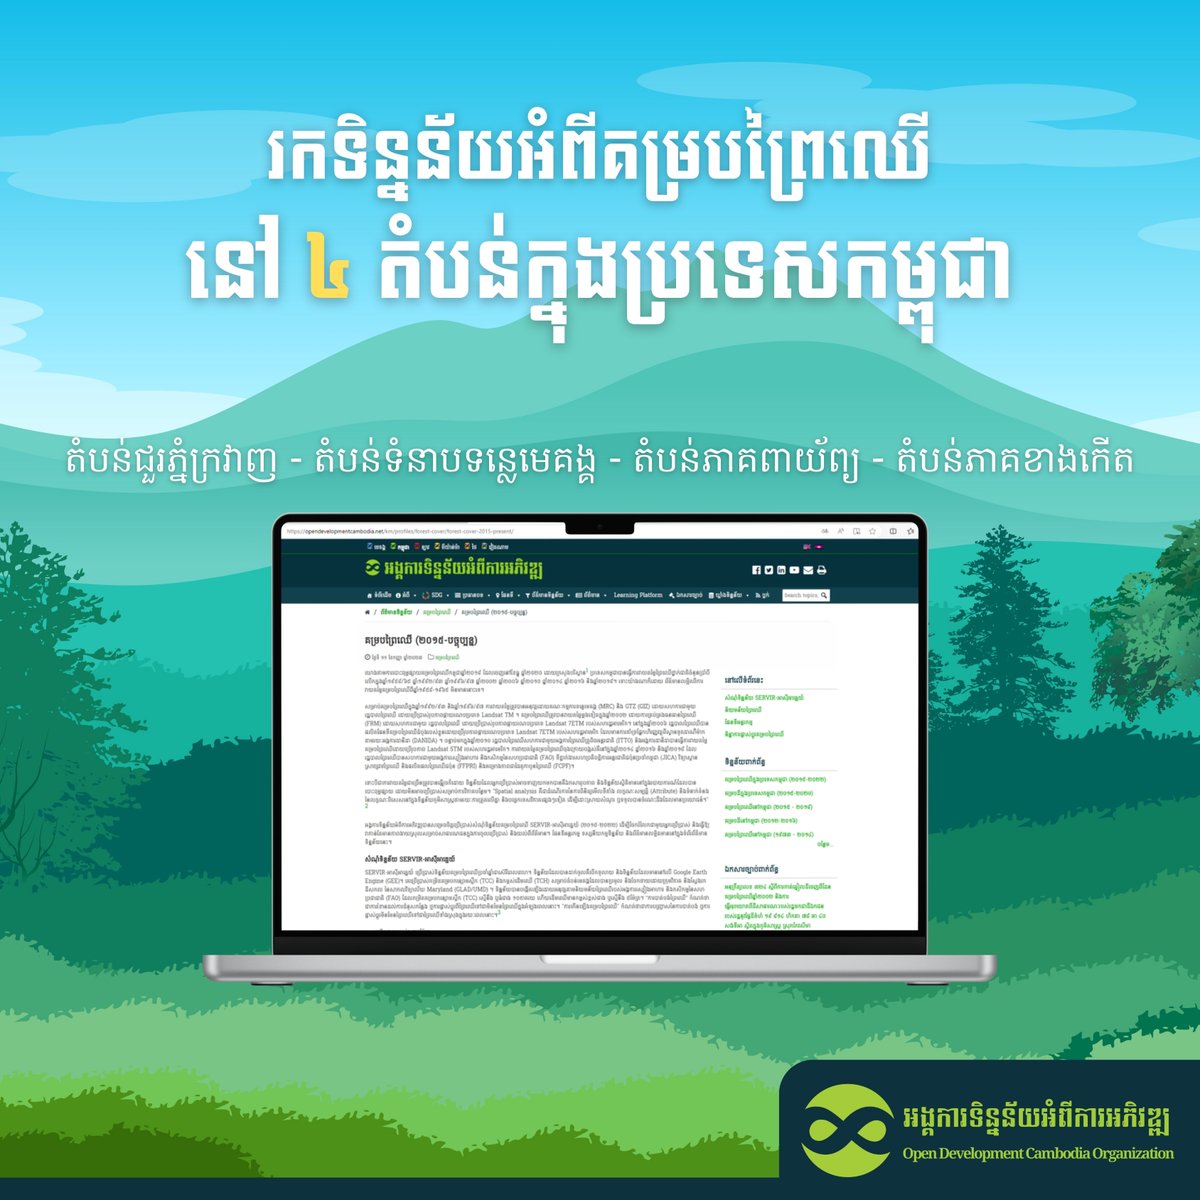 Have you seen the data about the Forest Covers in the 4 regions of Cambodia? If not, you can simply click the link below to see 🌳🗺📍 👉 Link: opendevelopmentcambodia.net/profiles/fores… #ForestCover #Forest #ODC